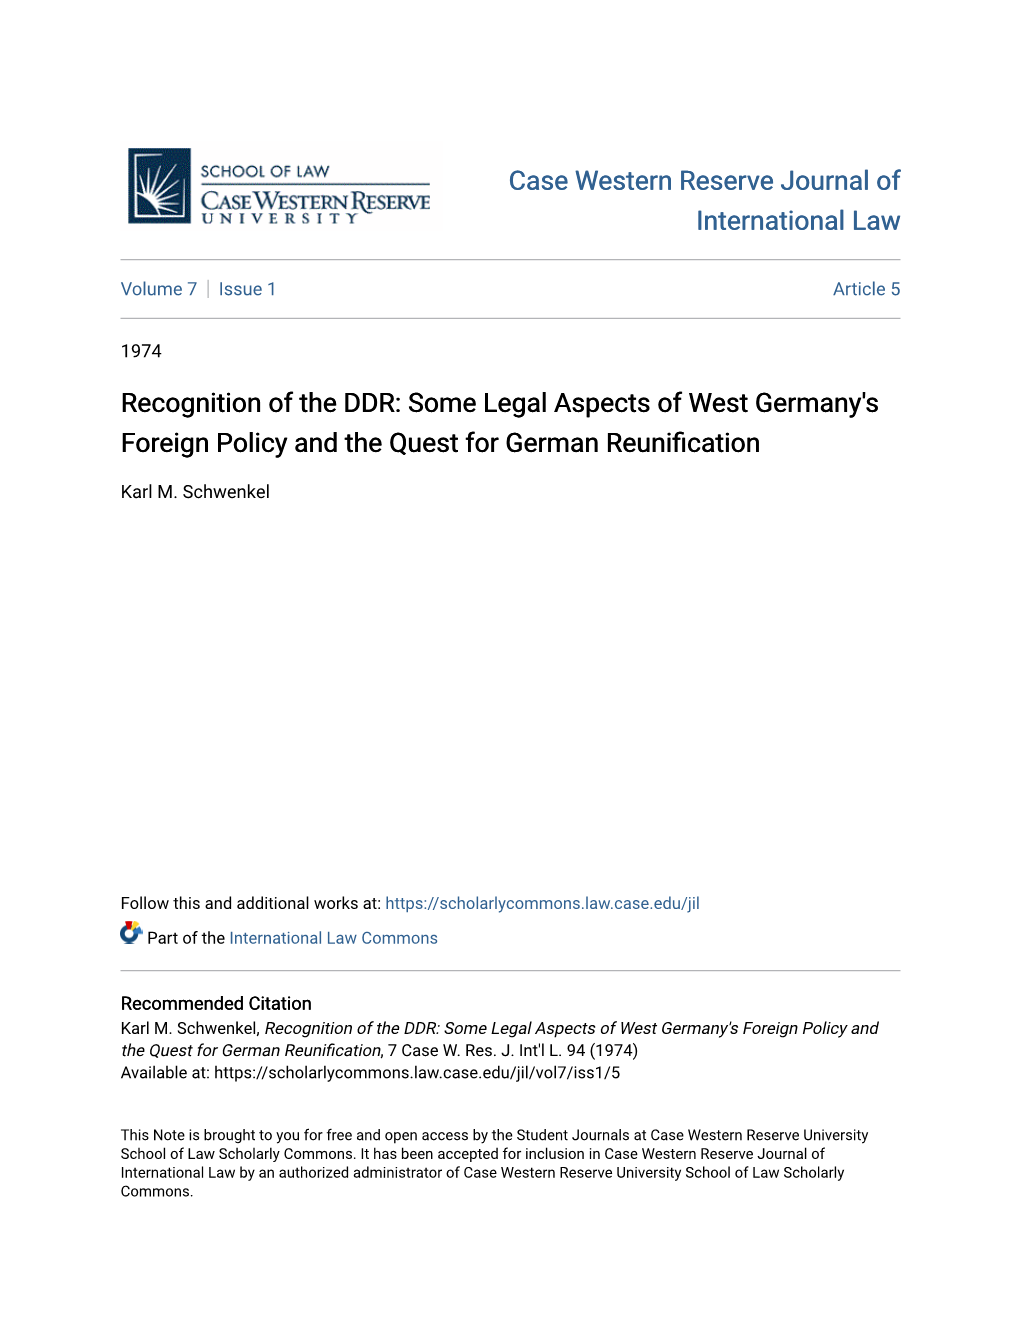 Recognition of the DDR: Some Legal Aspects of West Germany's Foreign Policy and the Quest for German Reunification